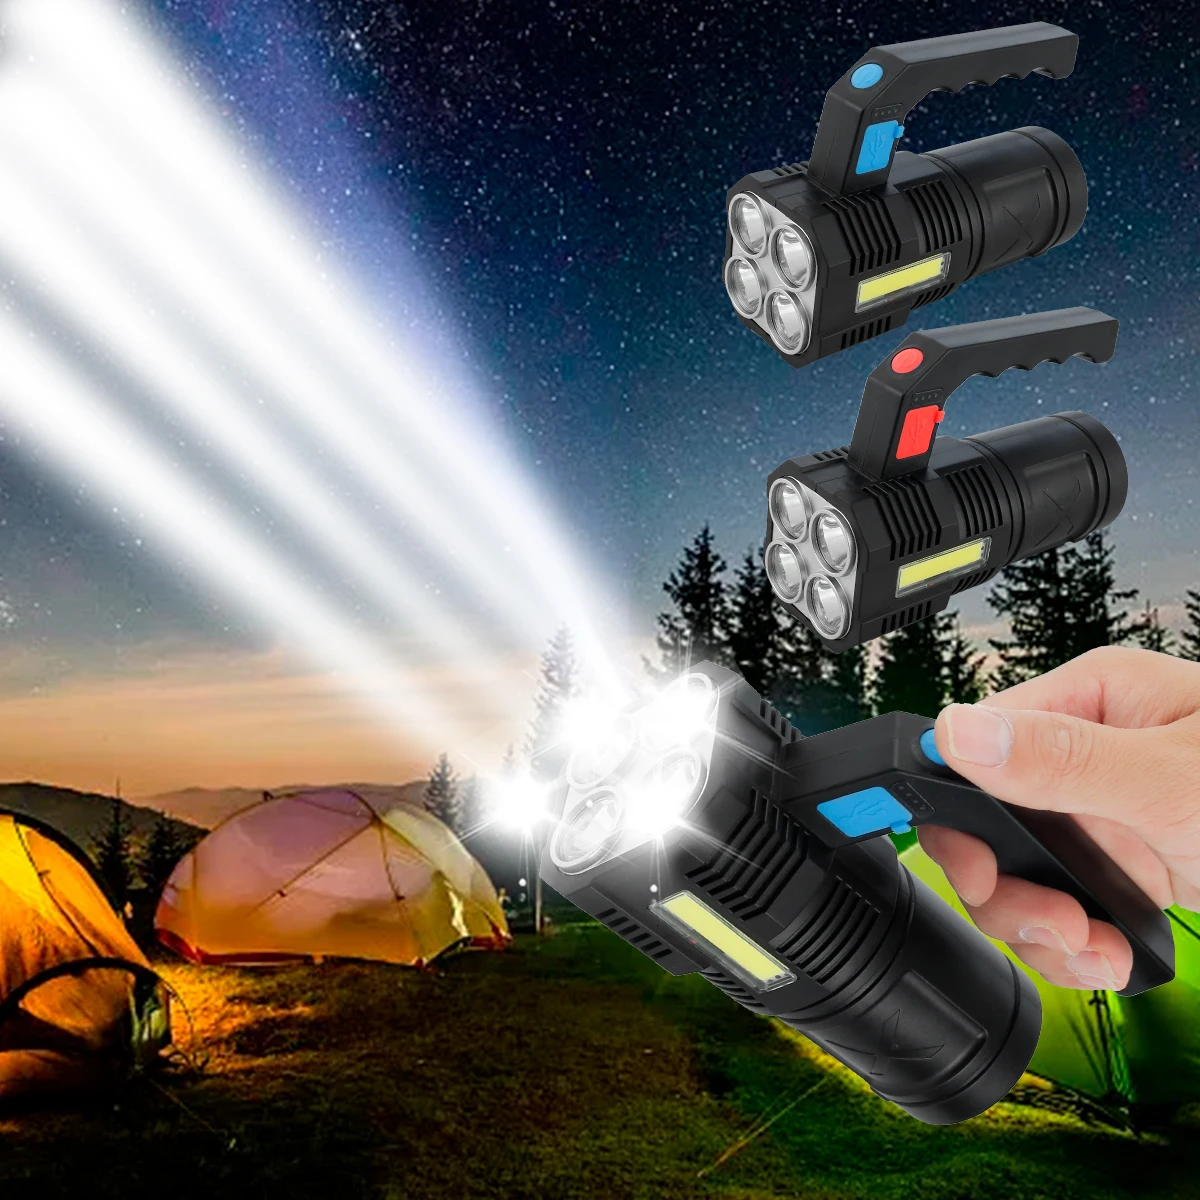 

USB Rechargeable LED Hand-held Flashlight 300LM Spotlight Searchlight with 1200mAh Battery IPX4 Waterproof Torch Light